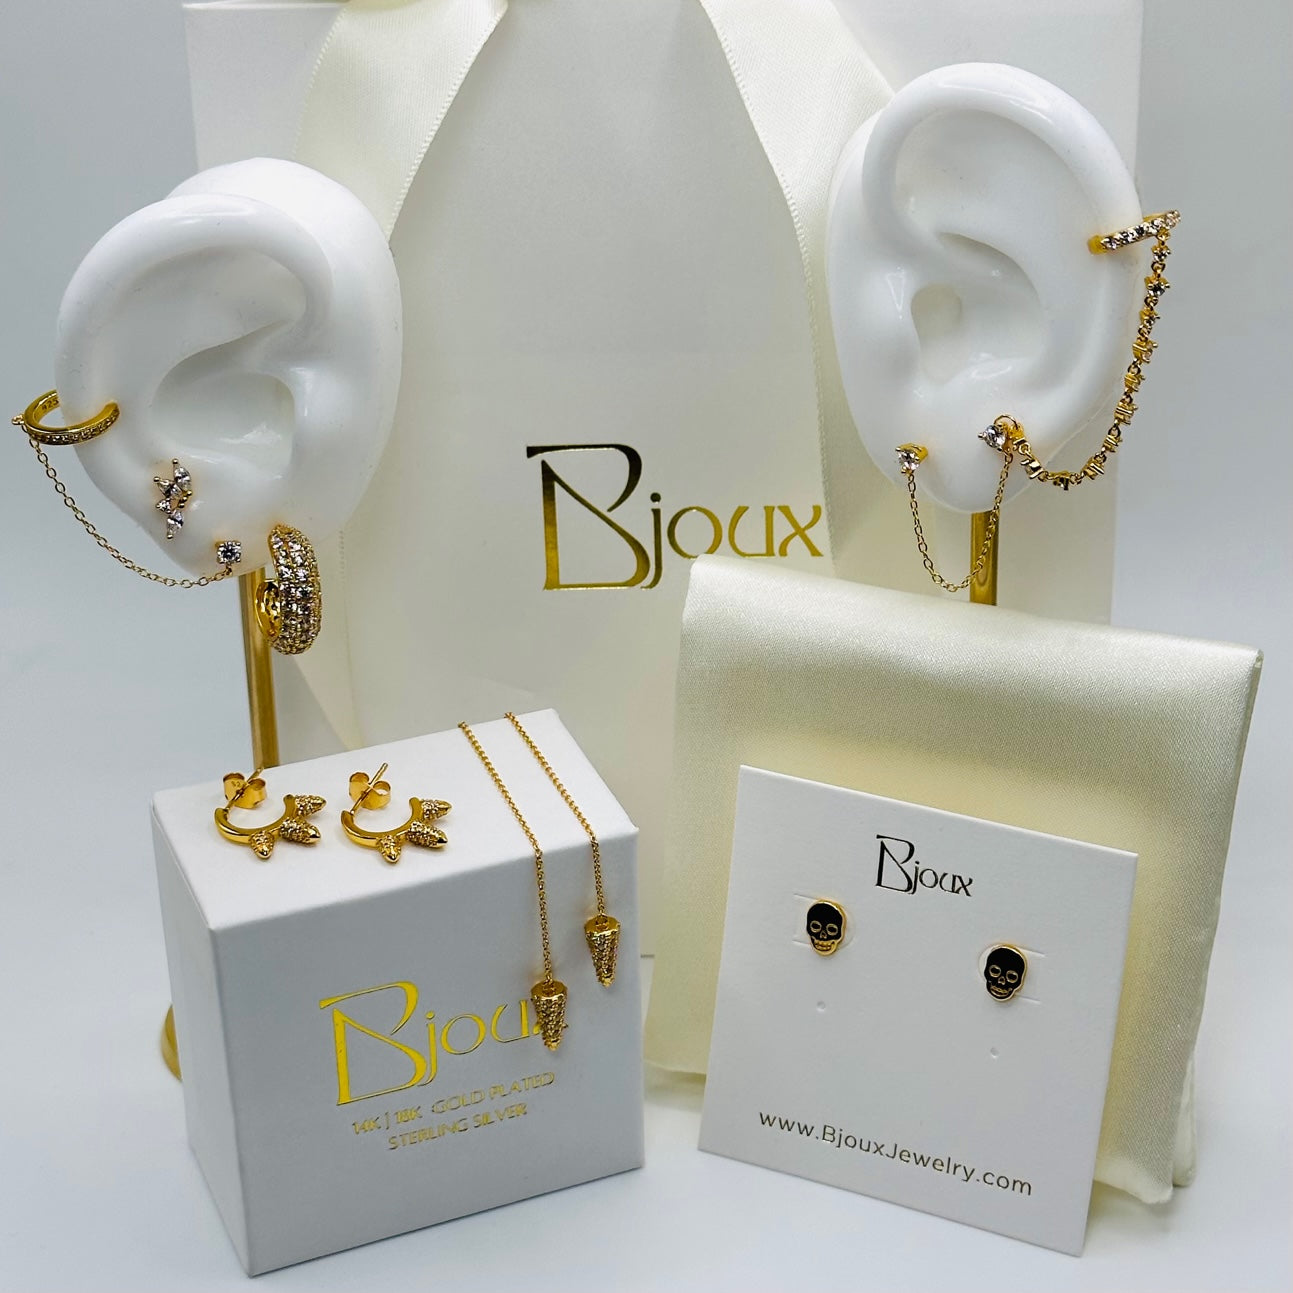 A display of beautiful sterling silver, 18k gold plated earrings.  Trendy, elegant and timeless tyles allow these pieces to be worn in multiple ways.